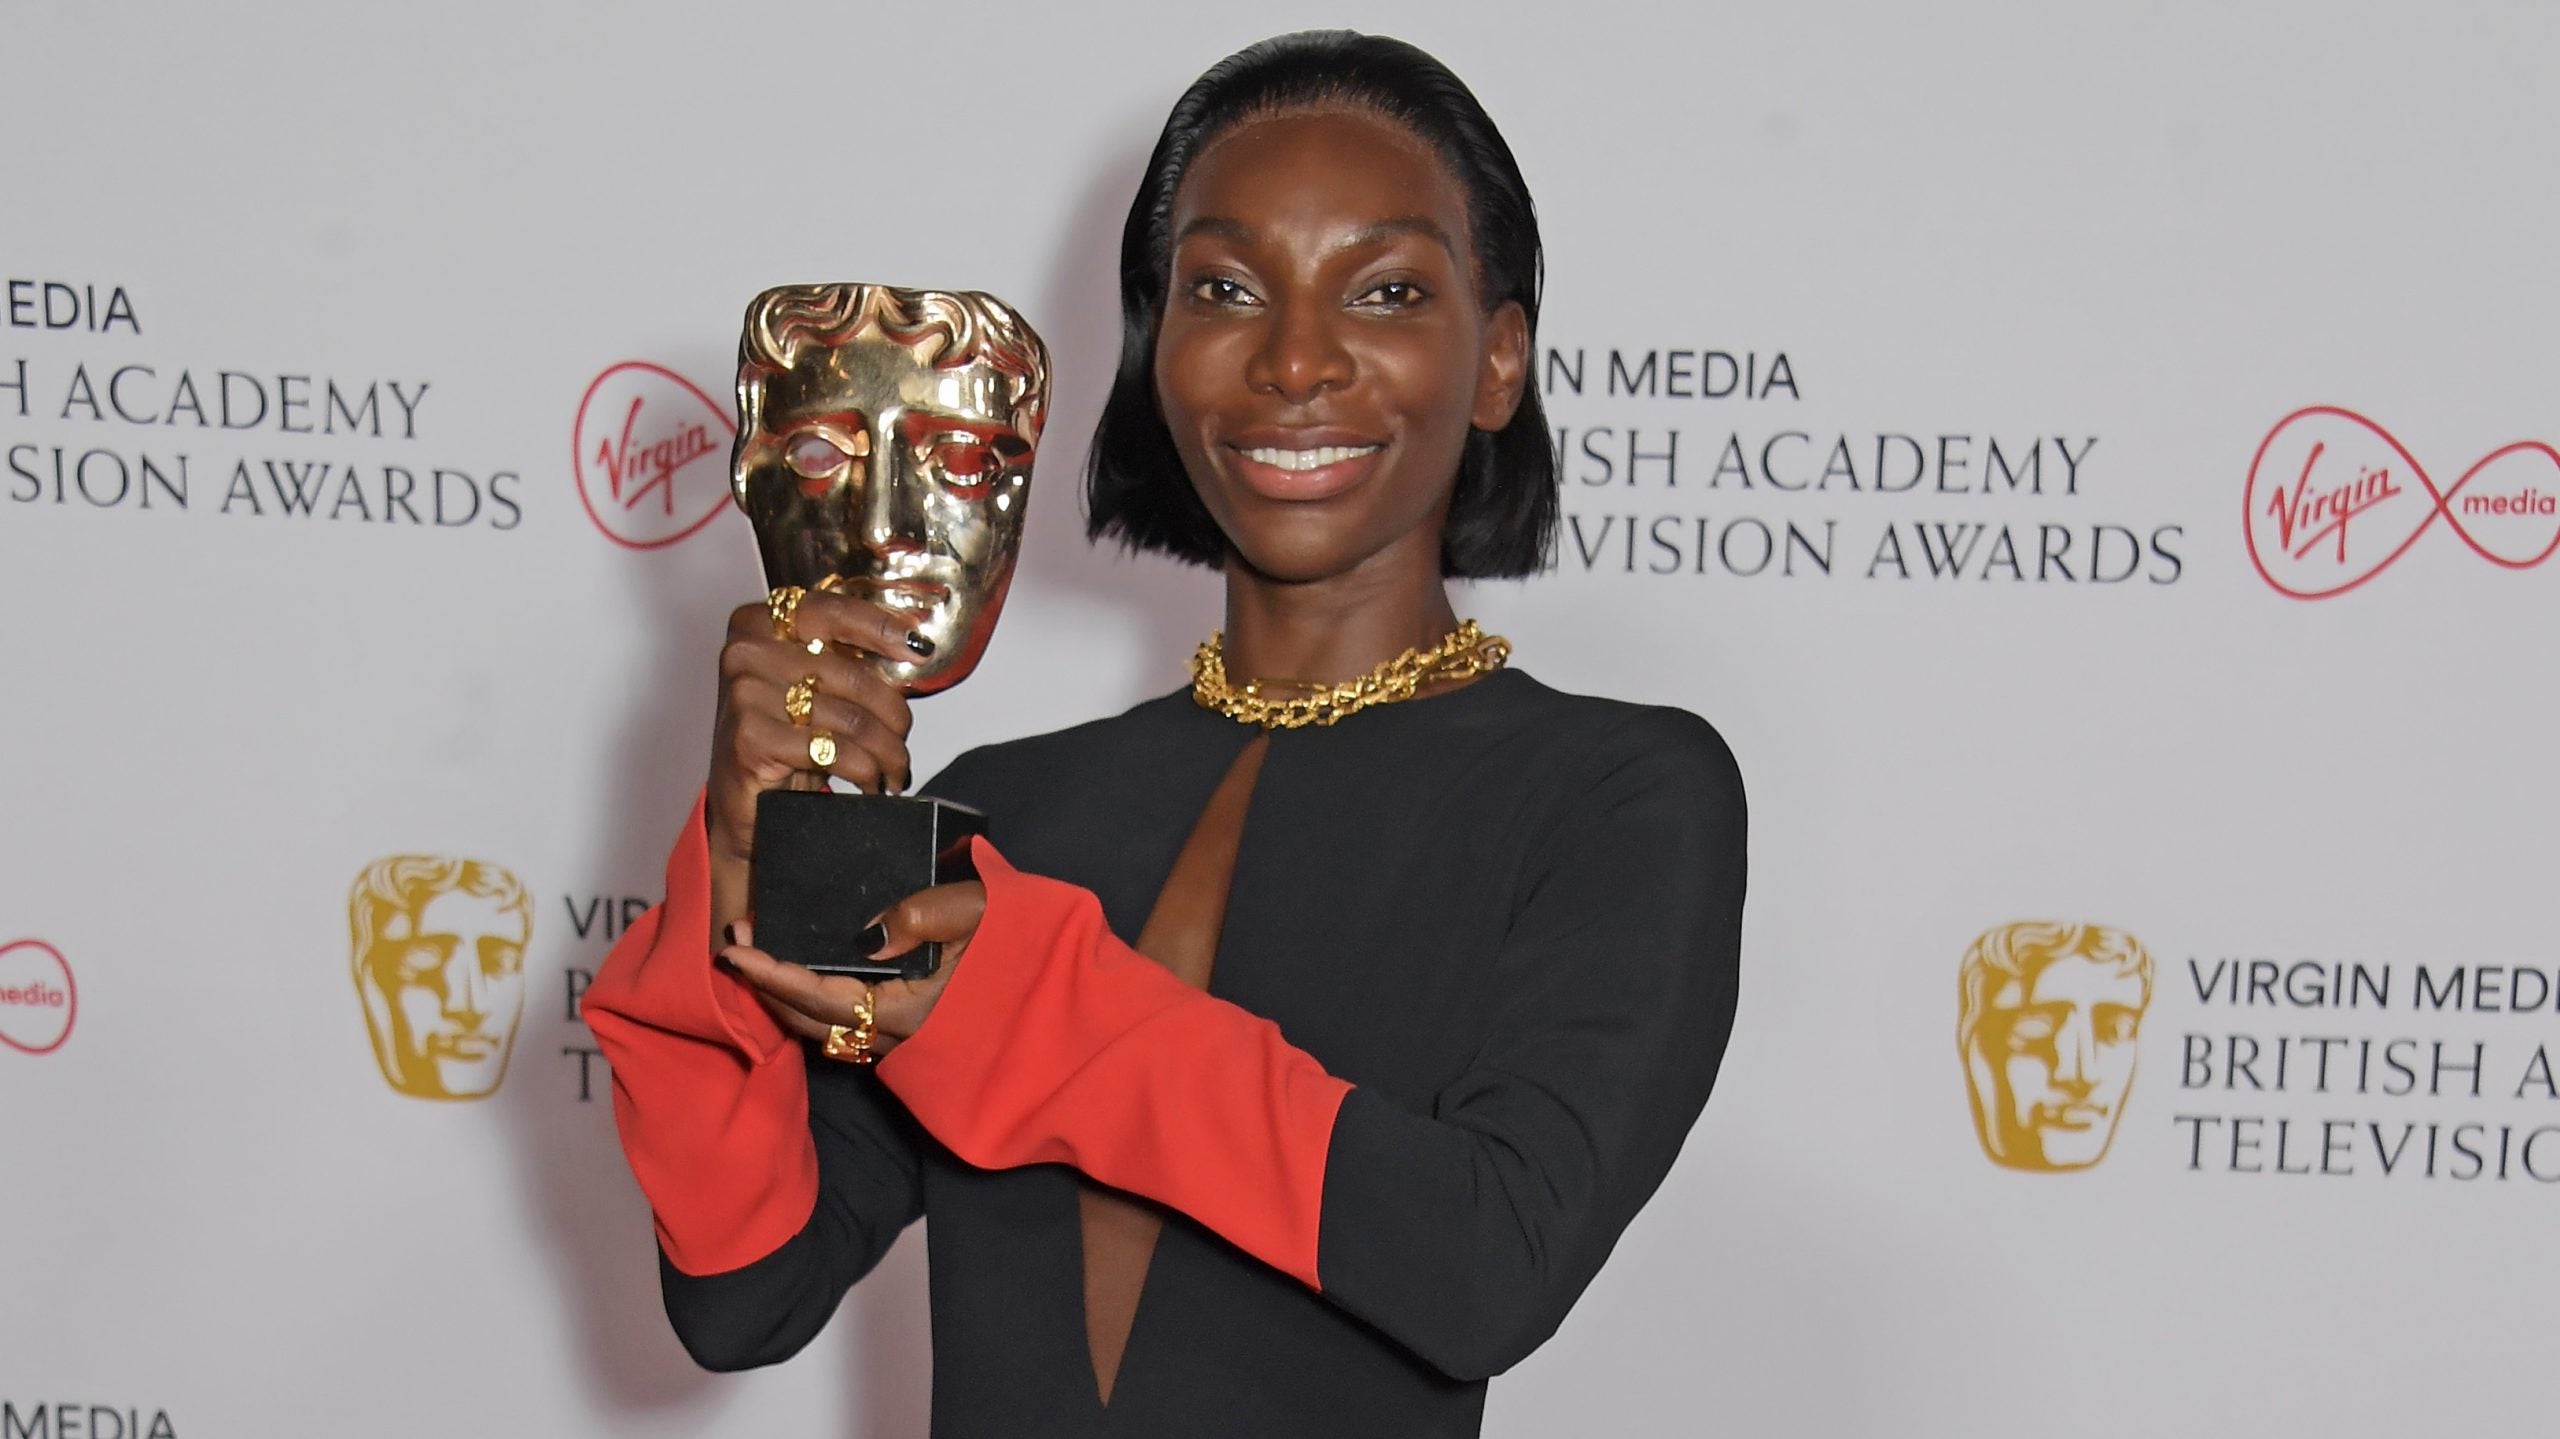 Wakanda Forever: Michaela Coel Joins ‘Black Panther’ Sequel